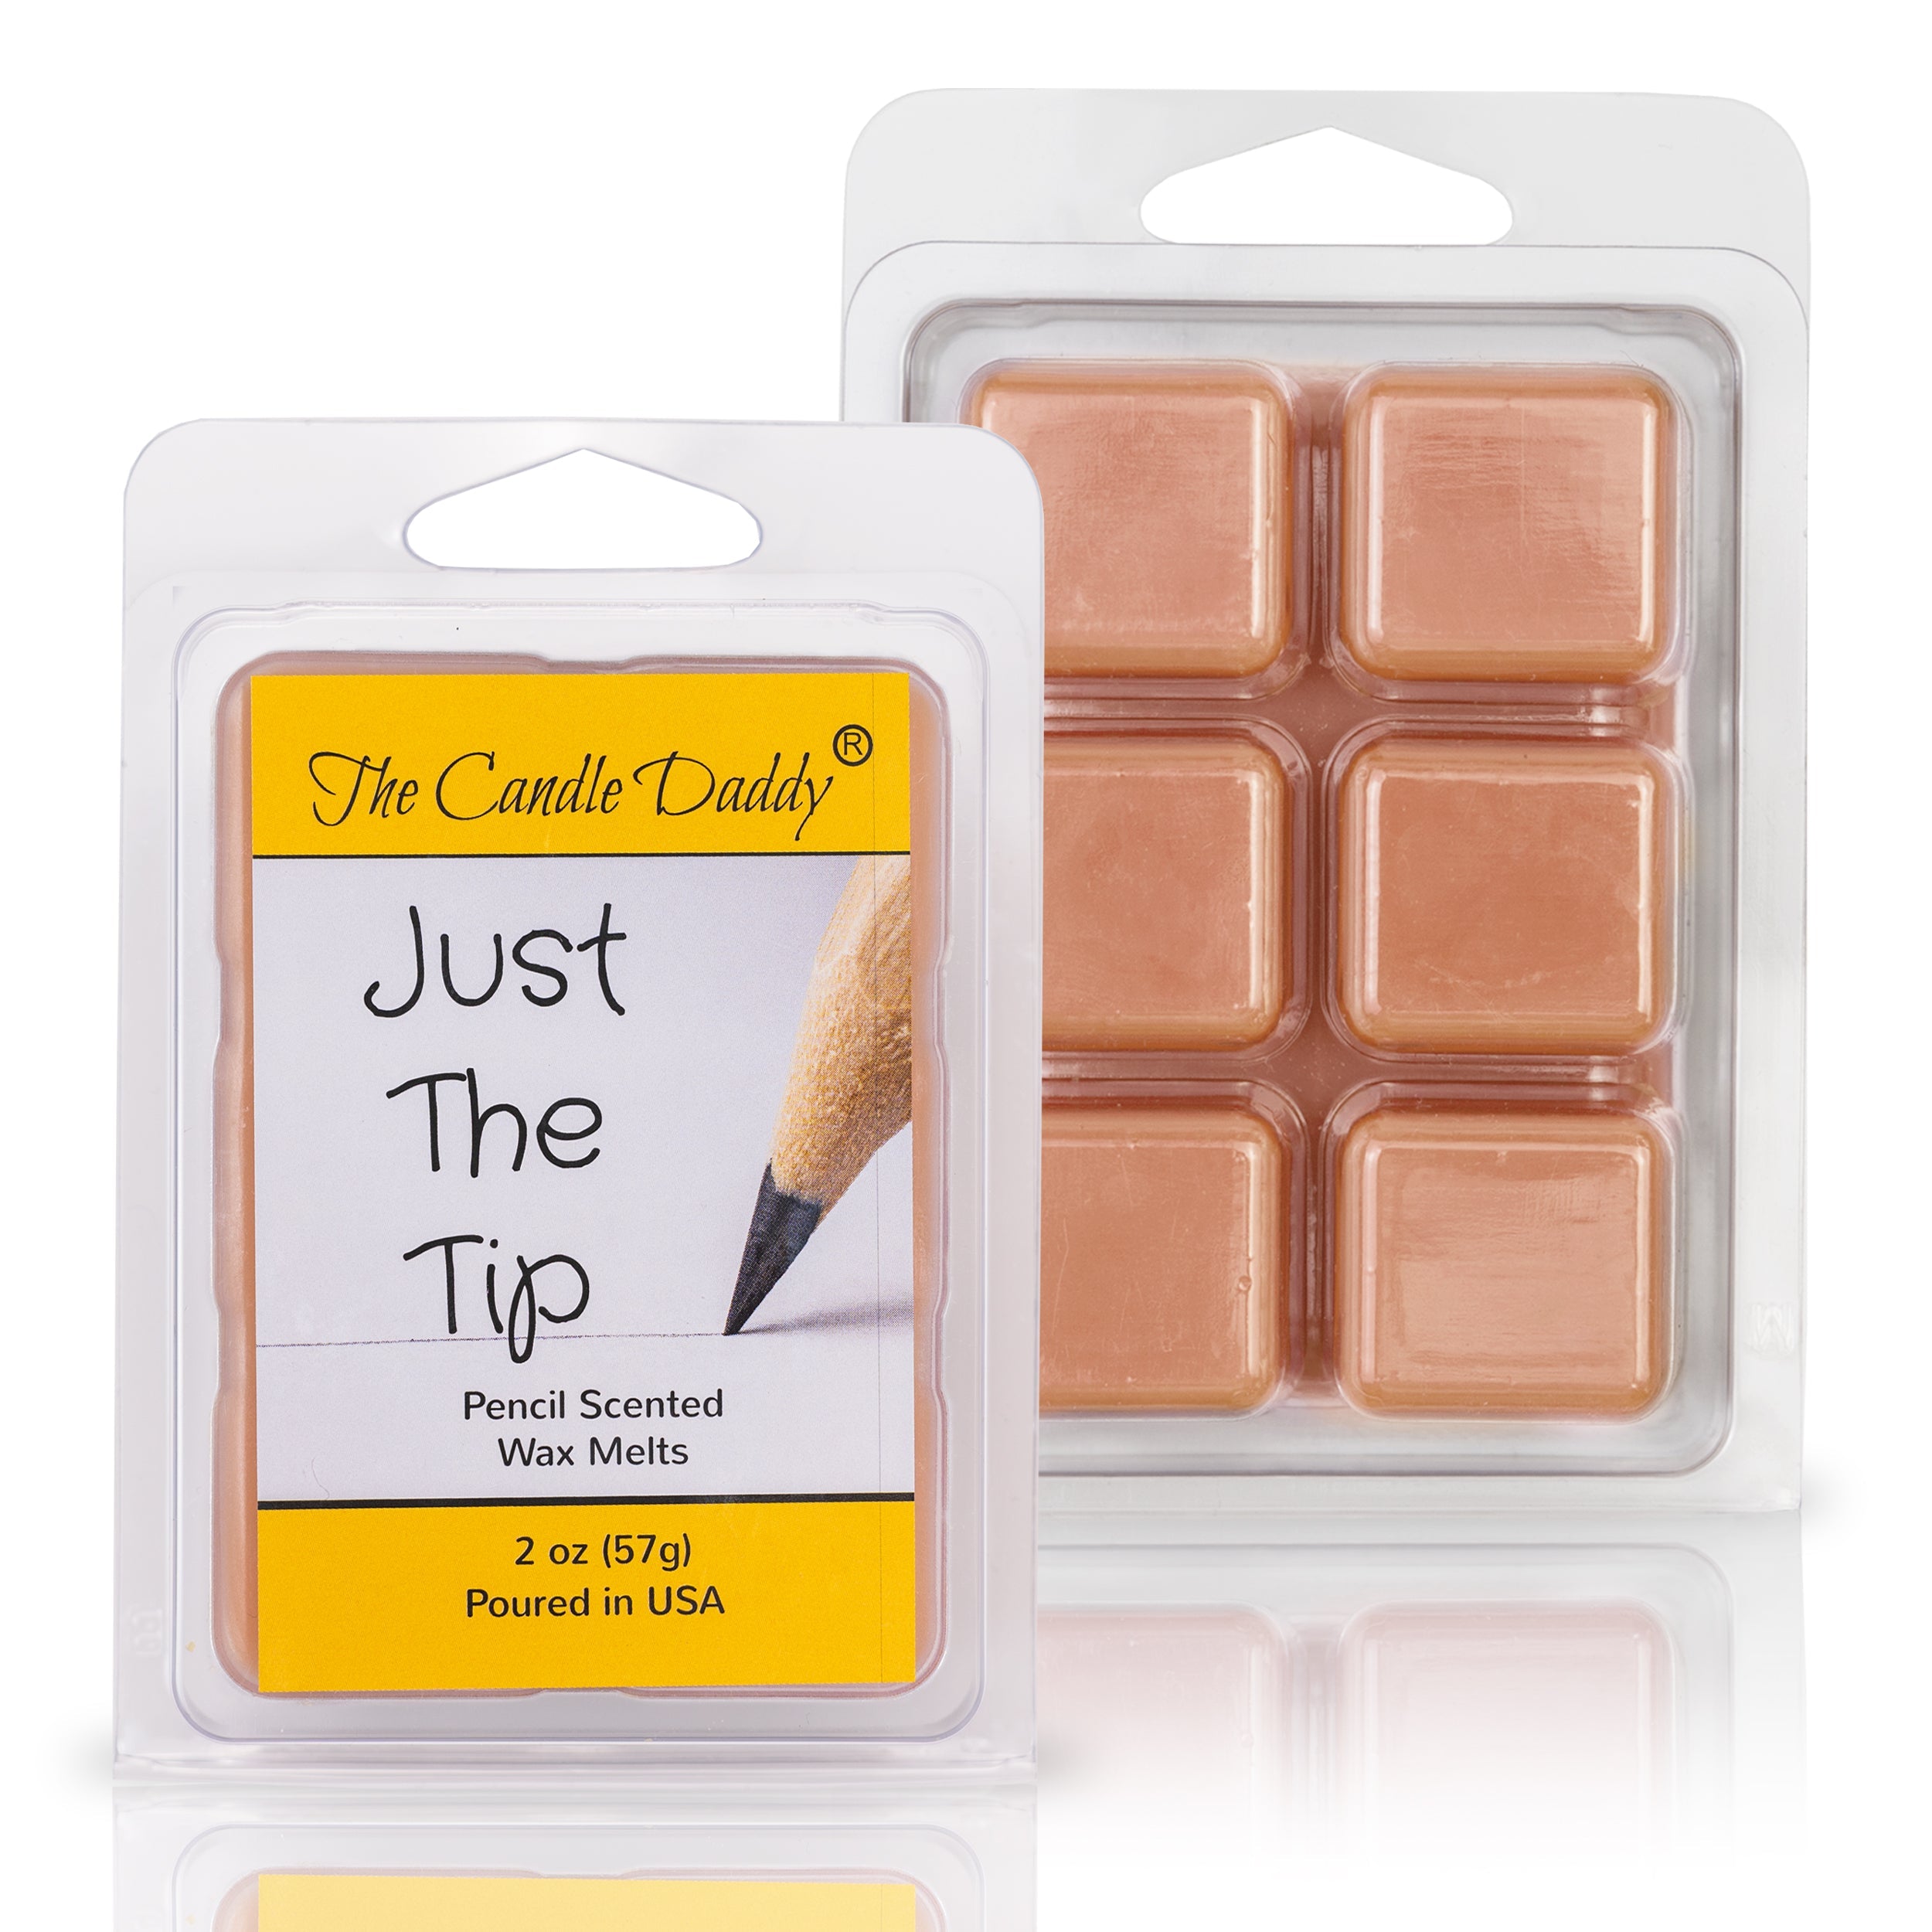 Just The Tip - #2 Pencil Scented - 2 OUNCES - 6 CUBES